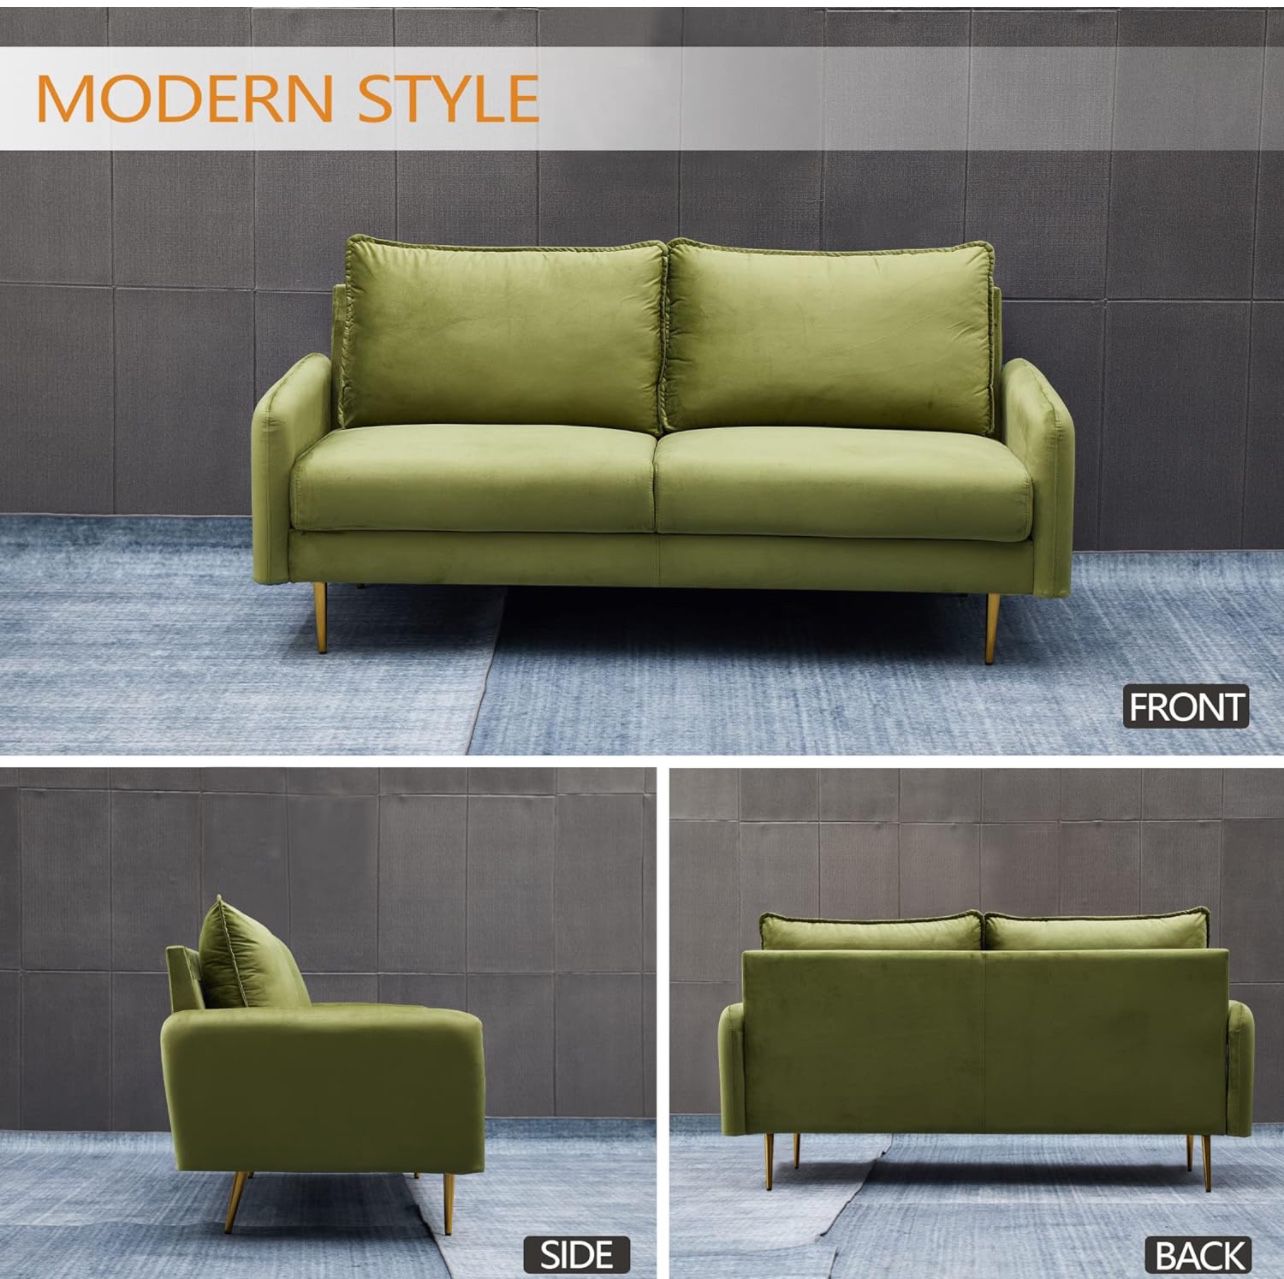 Velvet Sofa Set Modern Sofa & Loveseat Set 2 Piece Tufted Couch Set with Metal Legs for Living Room, Office, Bedroom - Army Green